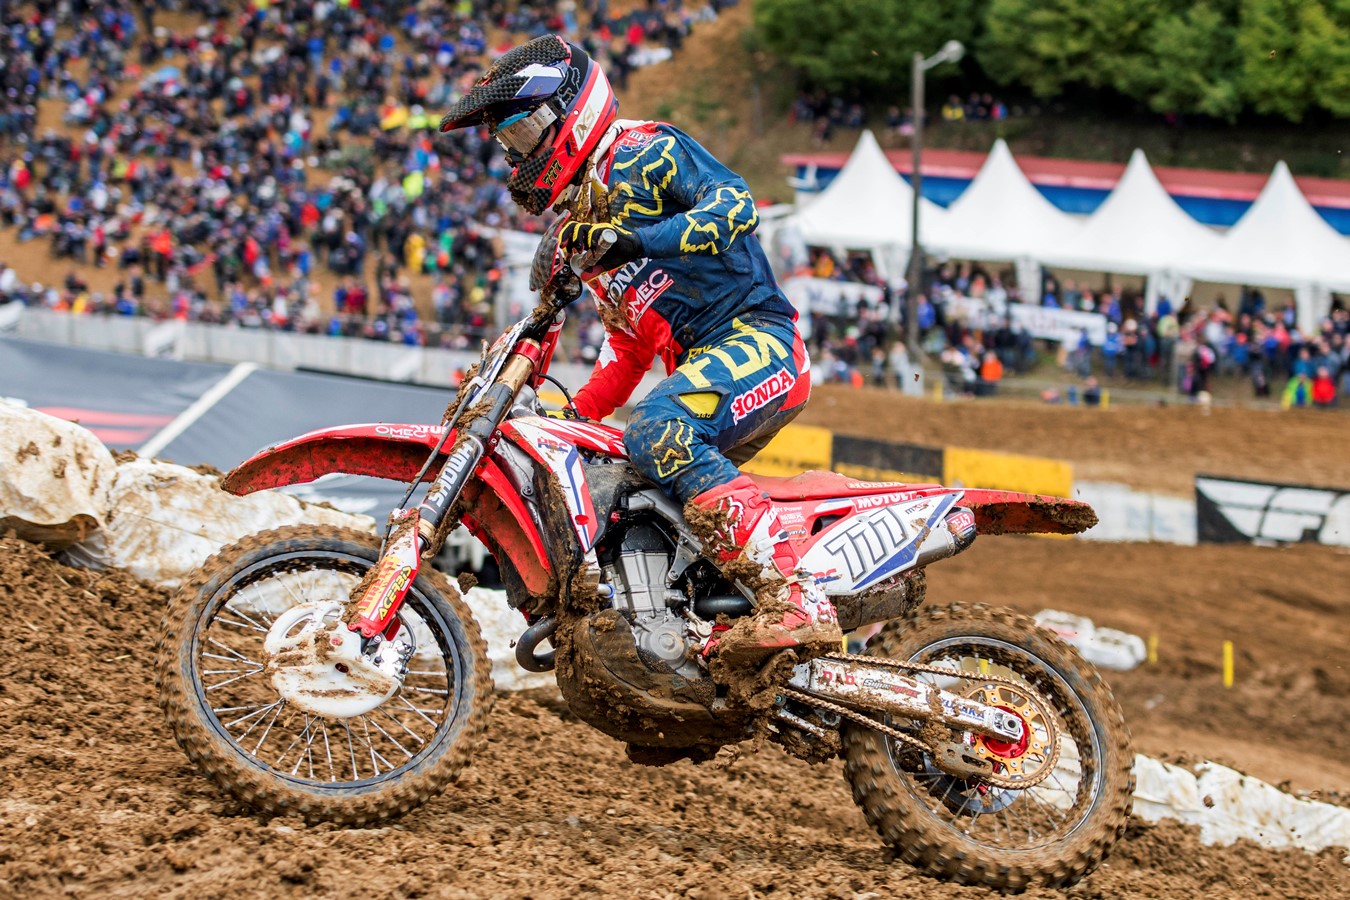 Podium success for MXGP and MX2 in French Finale